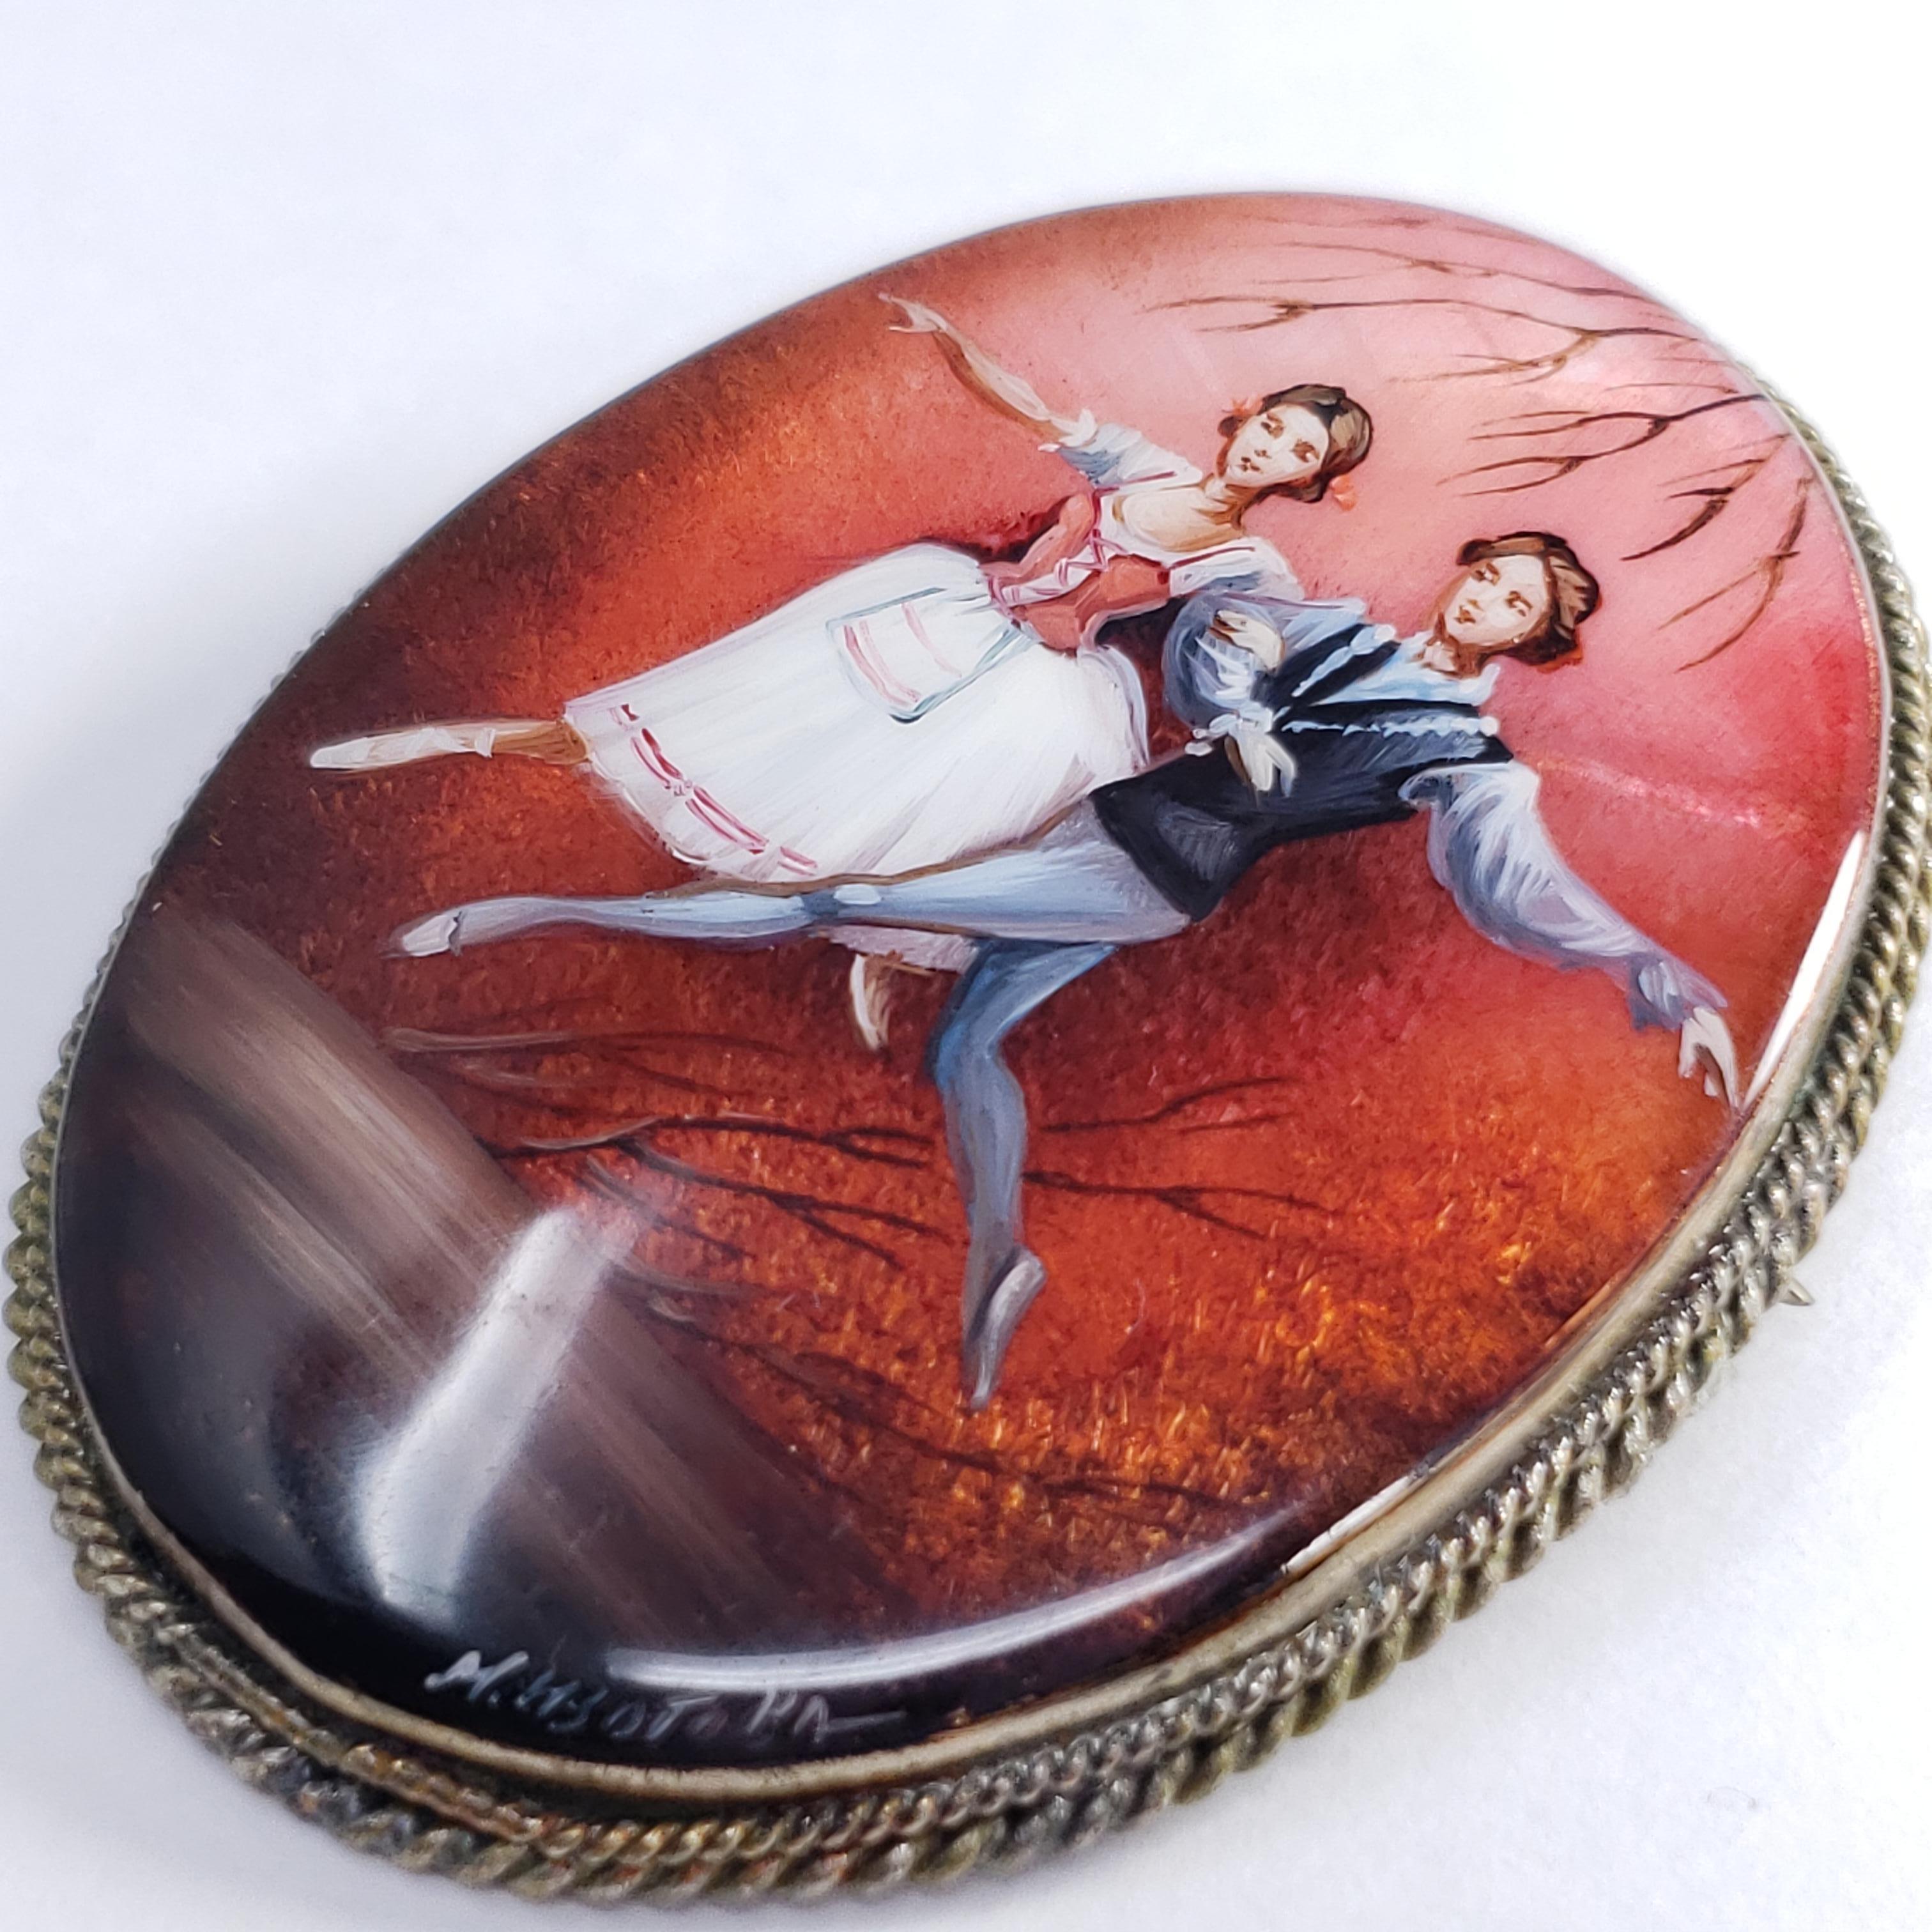 An exquisite Russian Fedoskino brooch set in a beautiful German silver bezel. Features a pair of dancers on a red background, hand-painted on a mother-of-pearl stone with a layer of lacquer.

Signed by artist - M Izotova (М Изотова)

Circa early